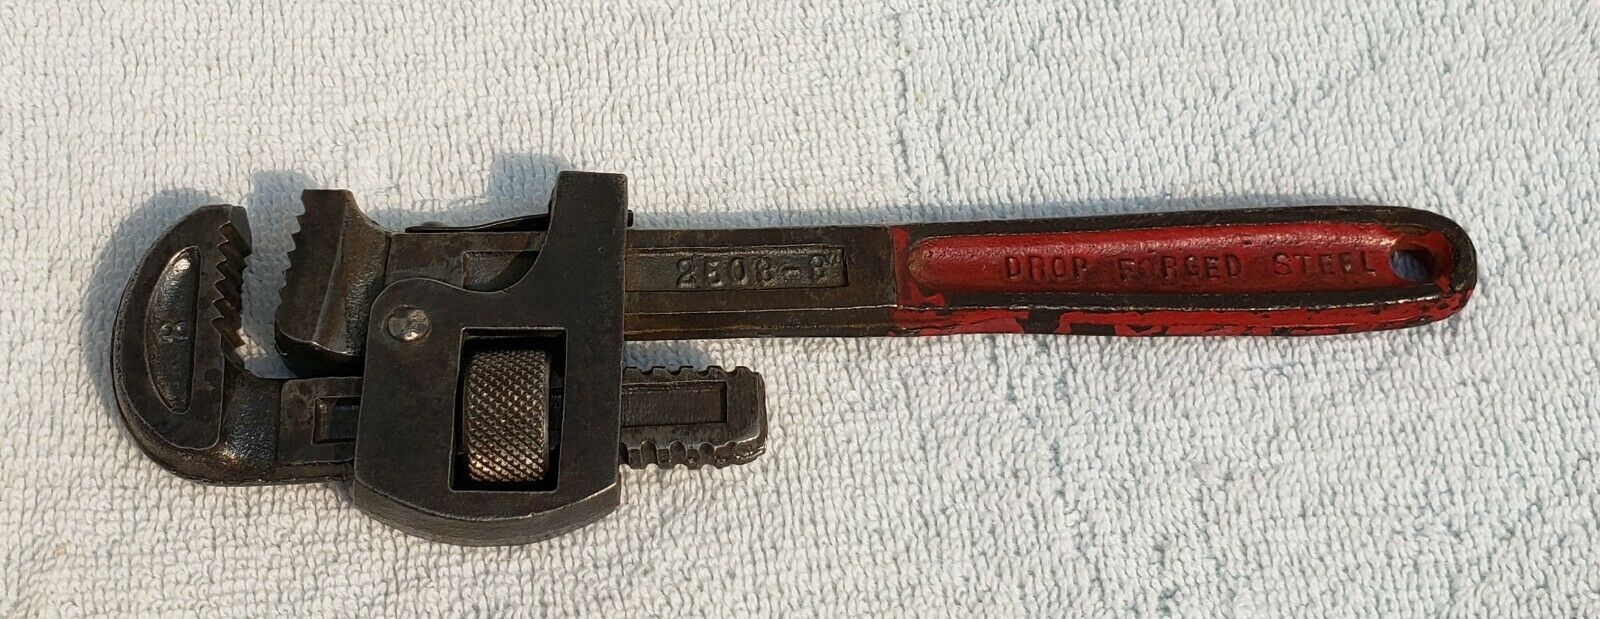 Vintage Witherby 2508-8 Pipe Wrench 8 Inch Made In Germany